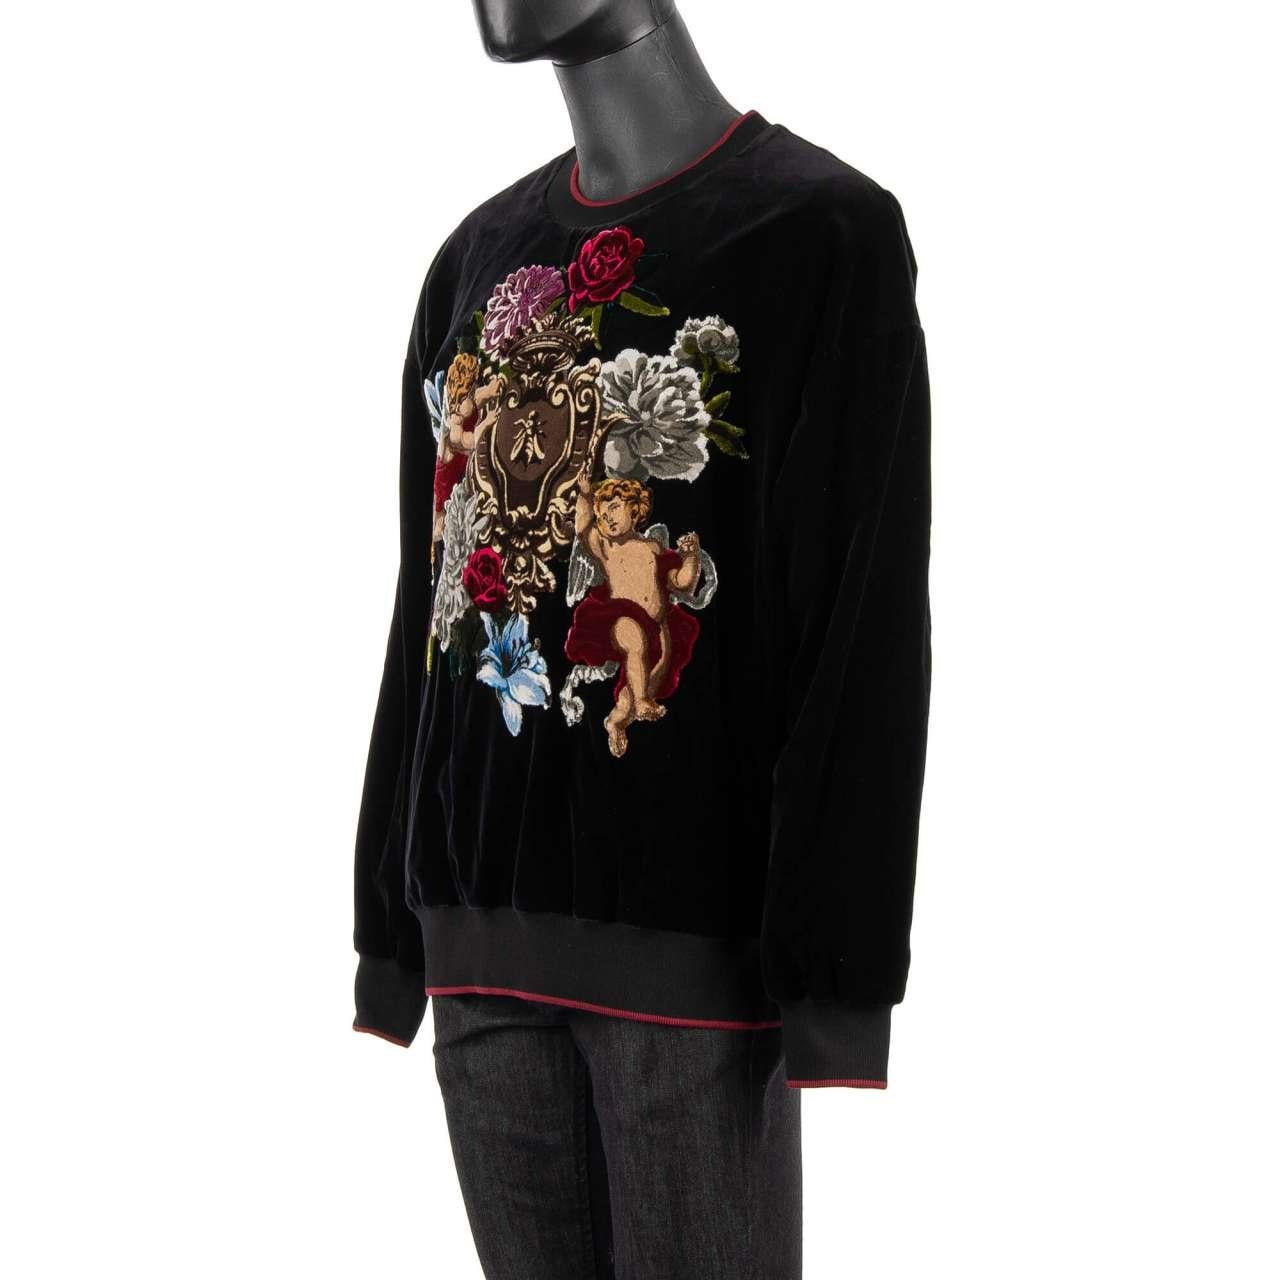 - Exceptional baroque style lined velvet sweater / sweatshirt with Angels, Bee and Flowers application by DOLCE & GABBANA - RUNWAY - Dolce & Gabbana Fashion Show - New with Tags - Former RRP: EUR 1.450 - MADE IN ITALY - Wide cut, fits bigger -